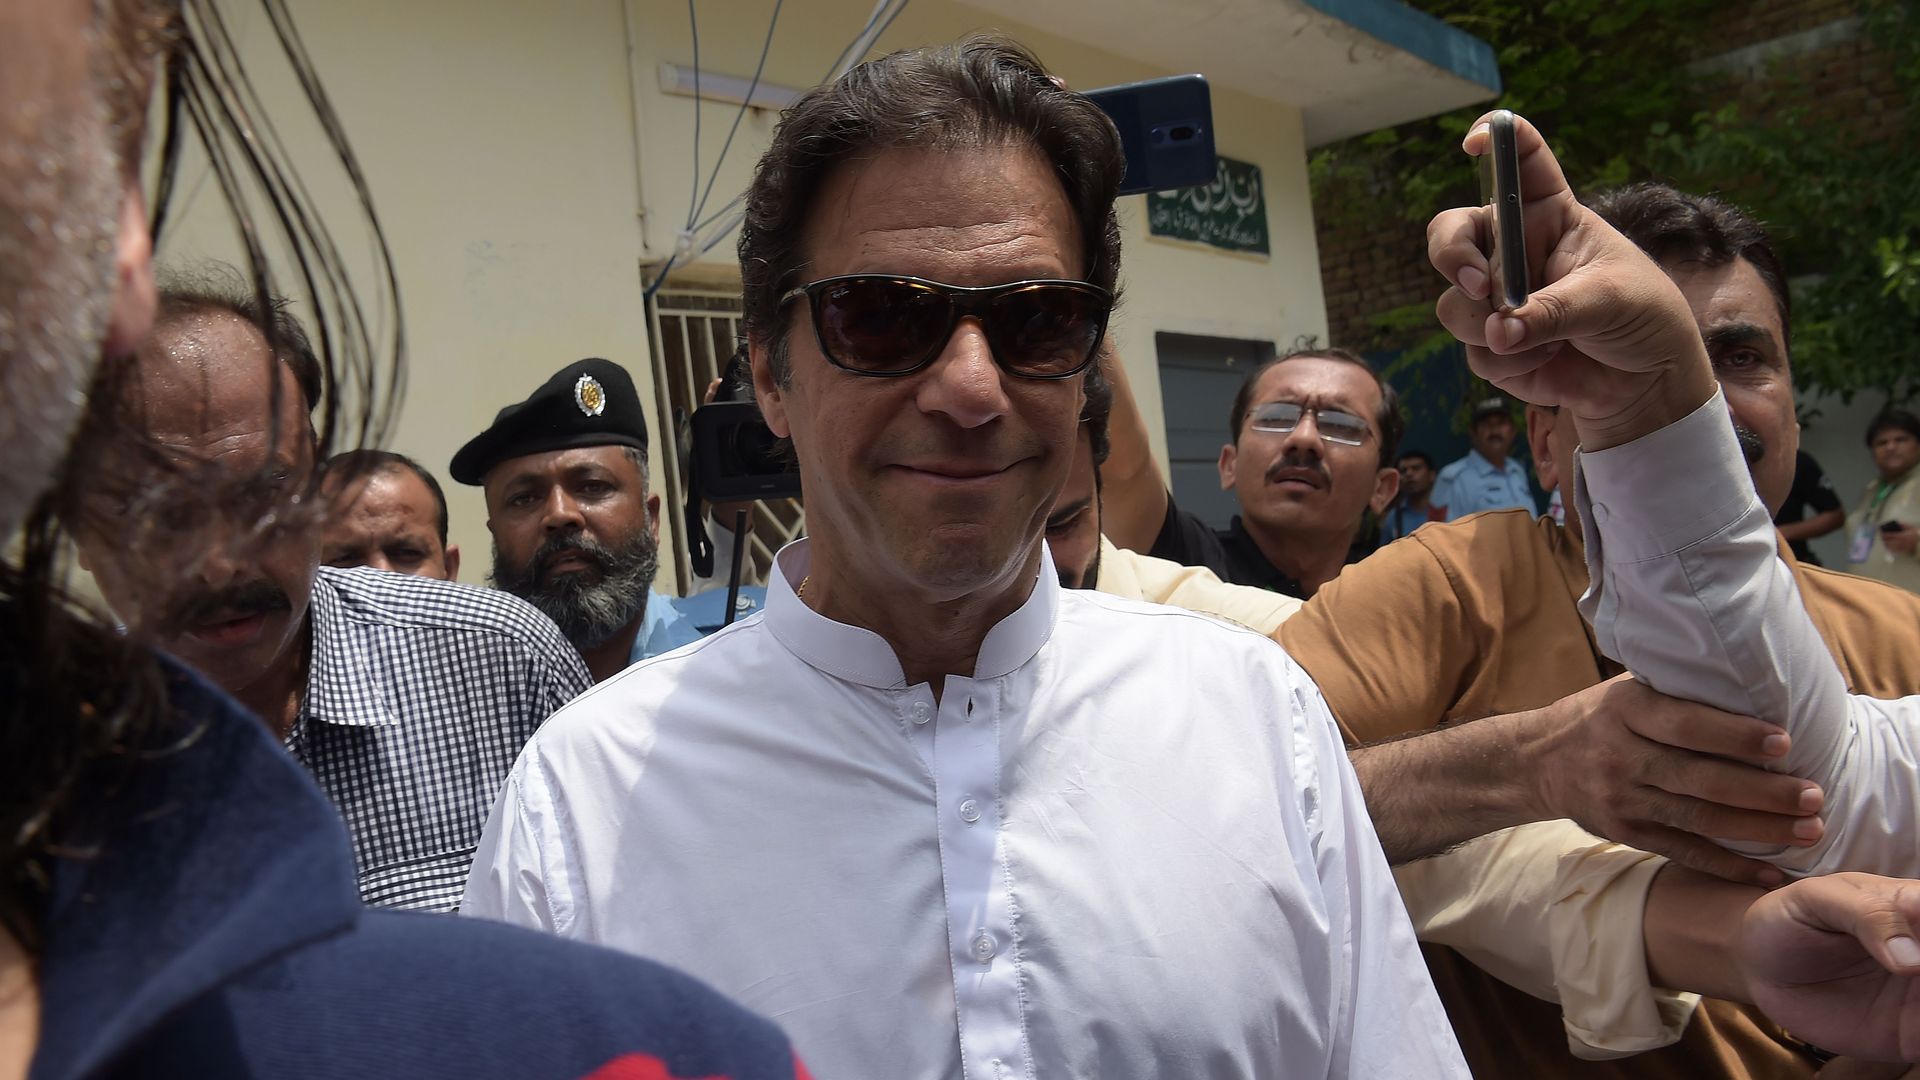 Imran Khan smiling with sunglasses on.